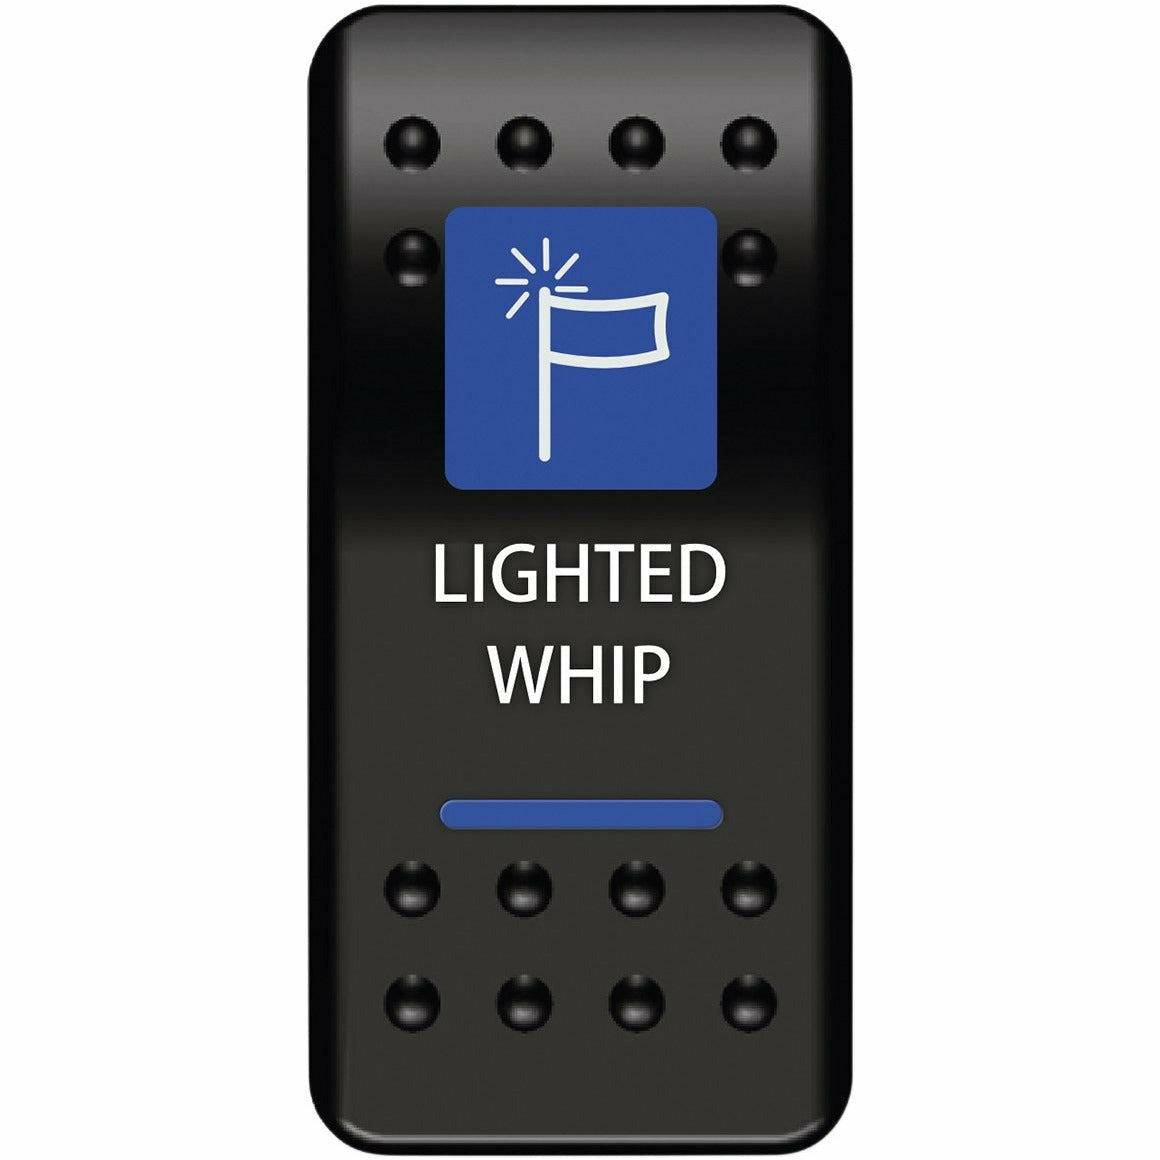 Moose Utility Lighted Whip Rocker Switch (Blue)